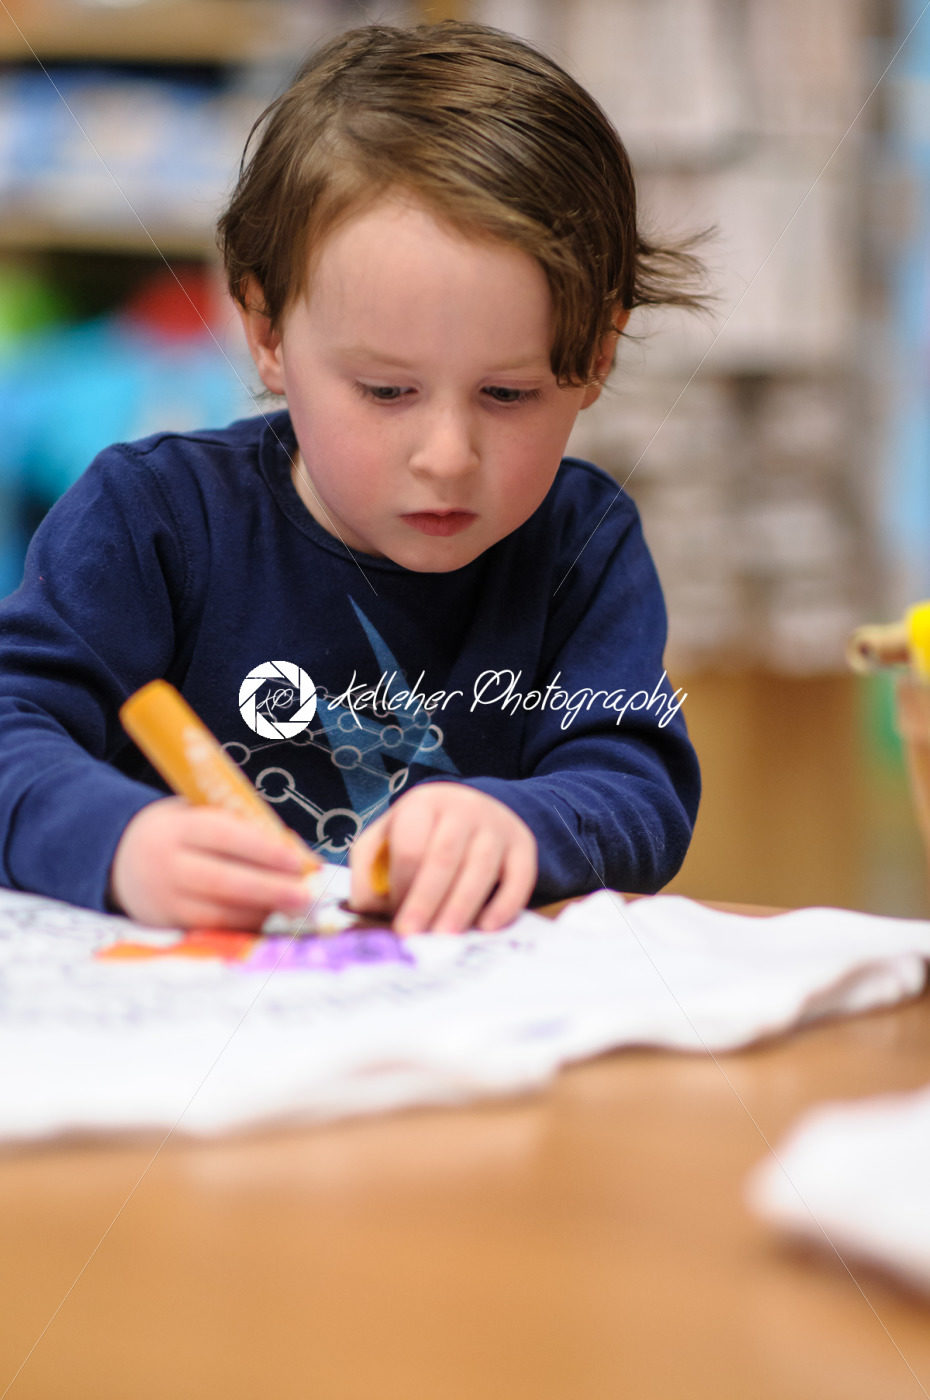 Young boy sitting down at desk indoors coloring with markers - Kelleher Photography Store